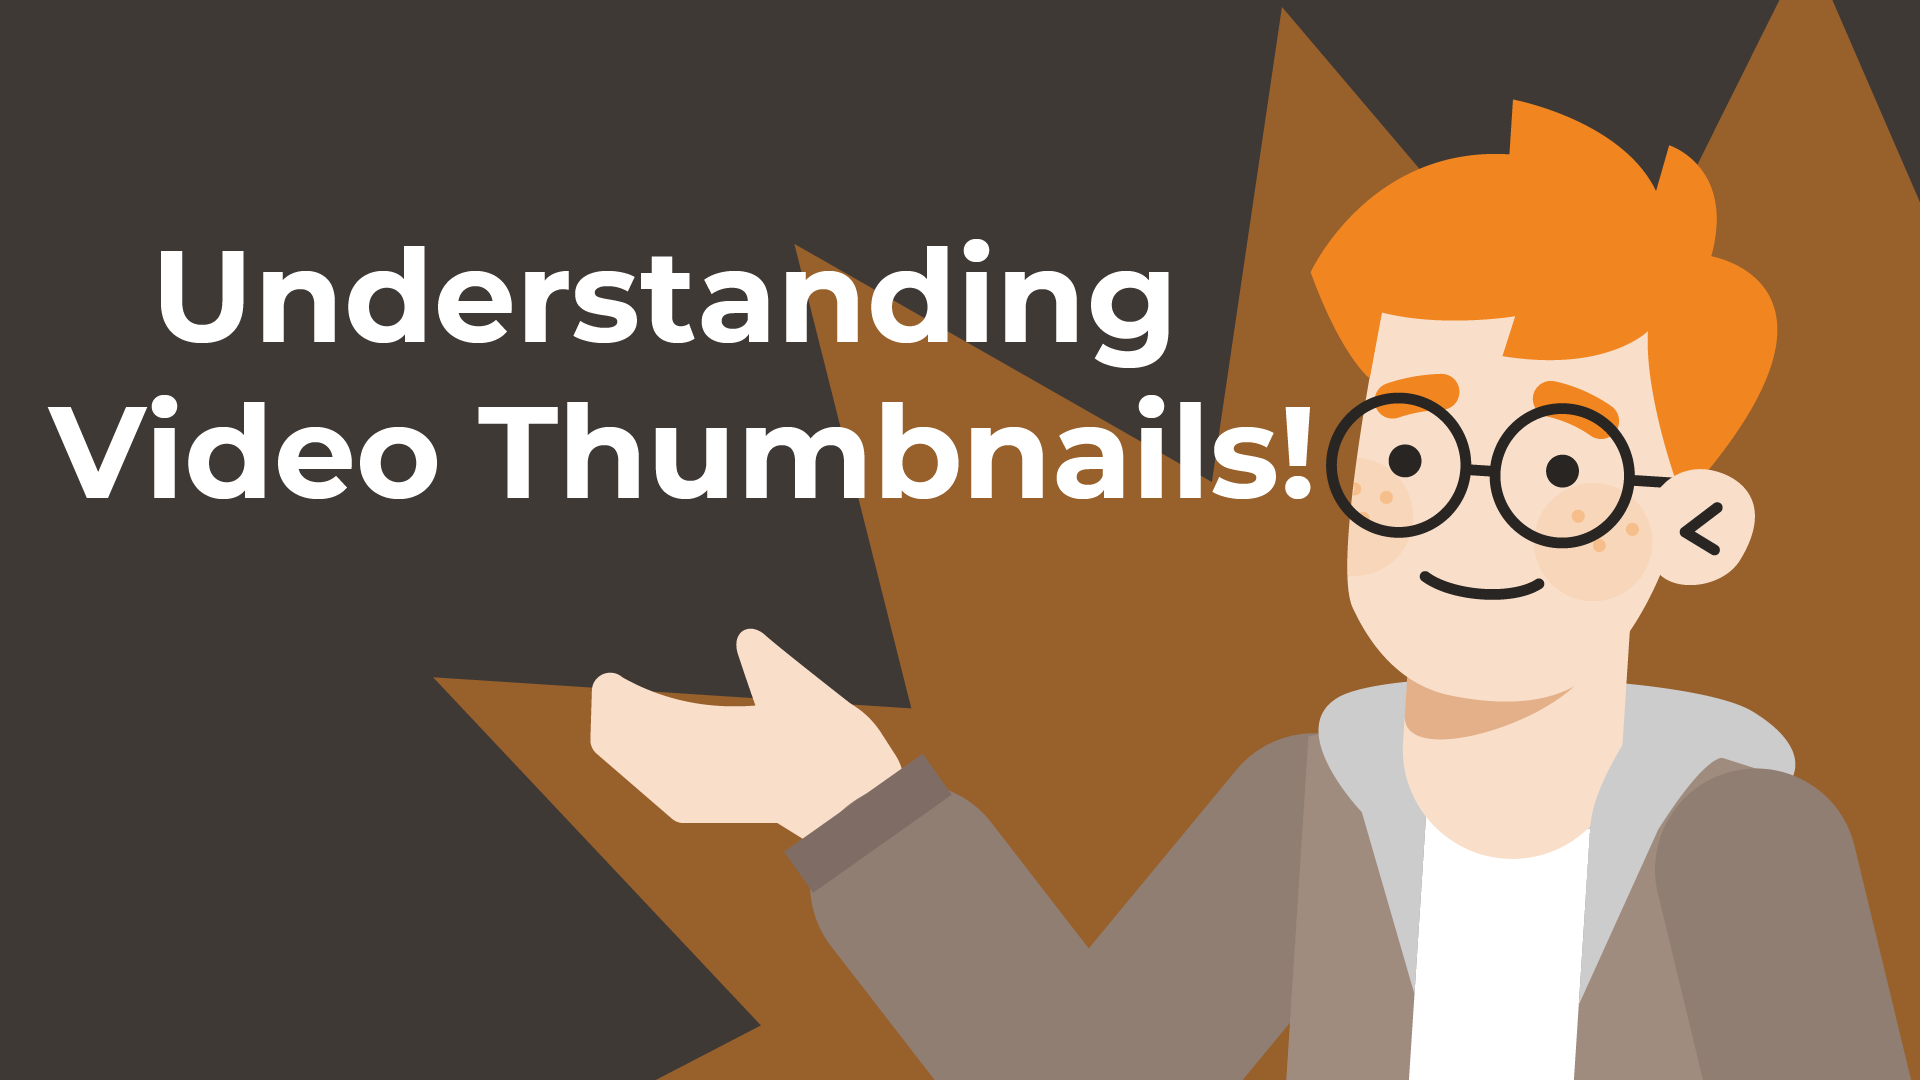 All About Video Thumbnails